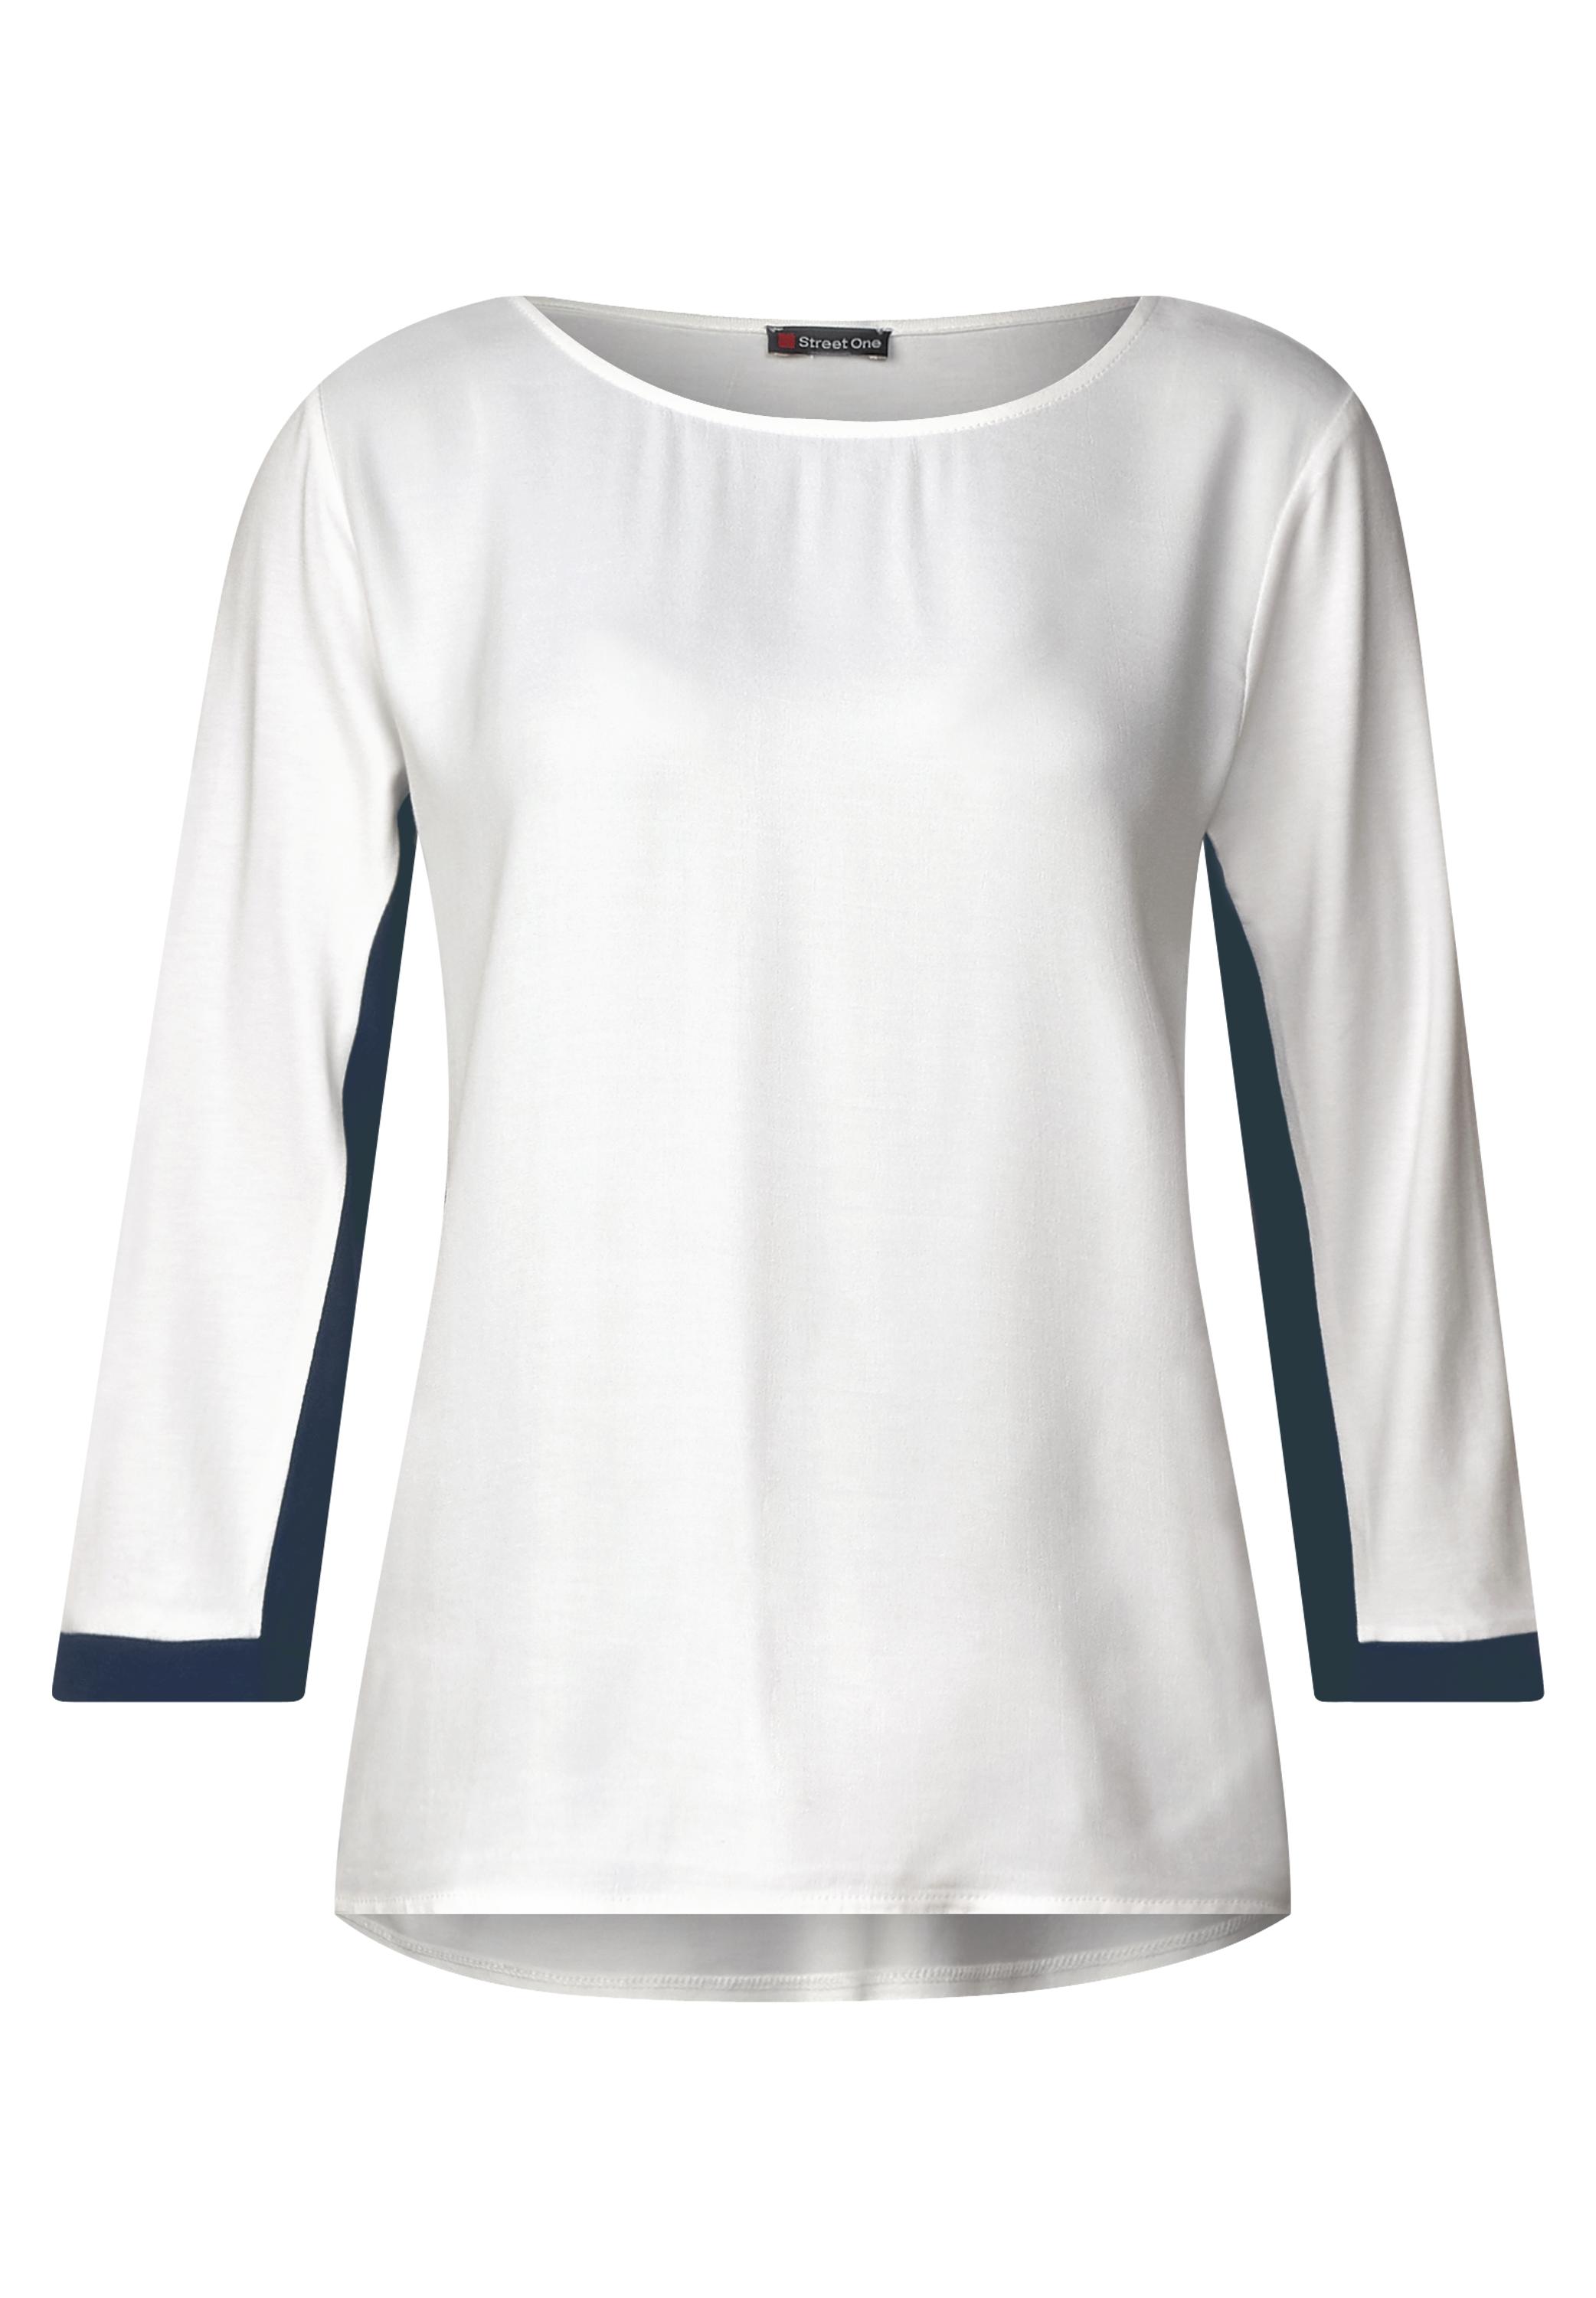 A313256-20108 One Street Rundhalsshirt in Evi White - CONCEPT Mode Off